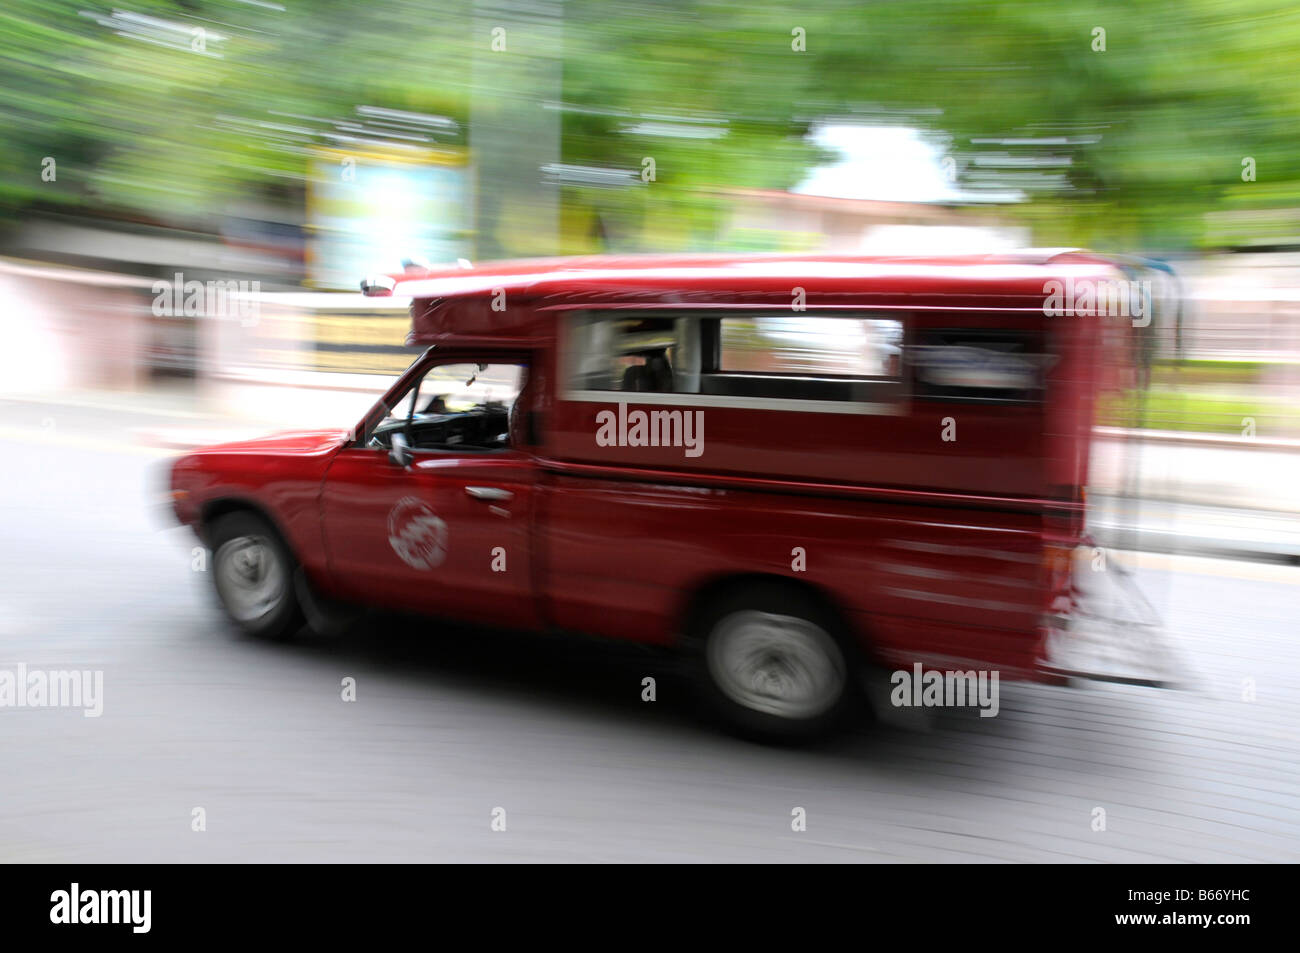 Rote Taxis in Chiang Mai, Nordthailand Stockfoto